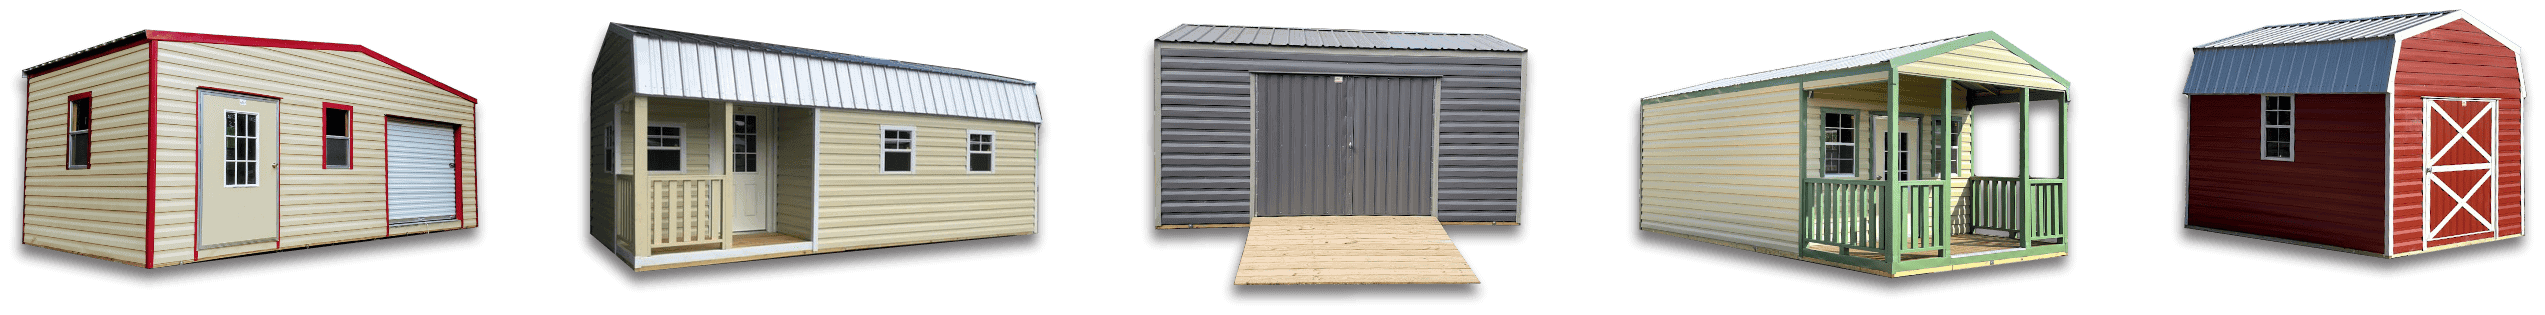 Discover our top-quality 14x14 sheds for sale and portable buildings at Robin Sheds. Shop our selection of 14x14 storage sheds that suit your needs. Find the best 14x14 shed dealer for outdoor storage buildings, and explore the various shed styles available. Order now at Robin Sheds!